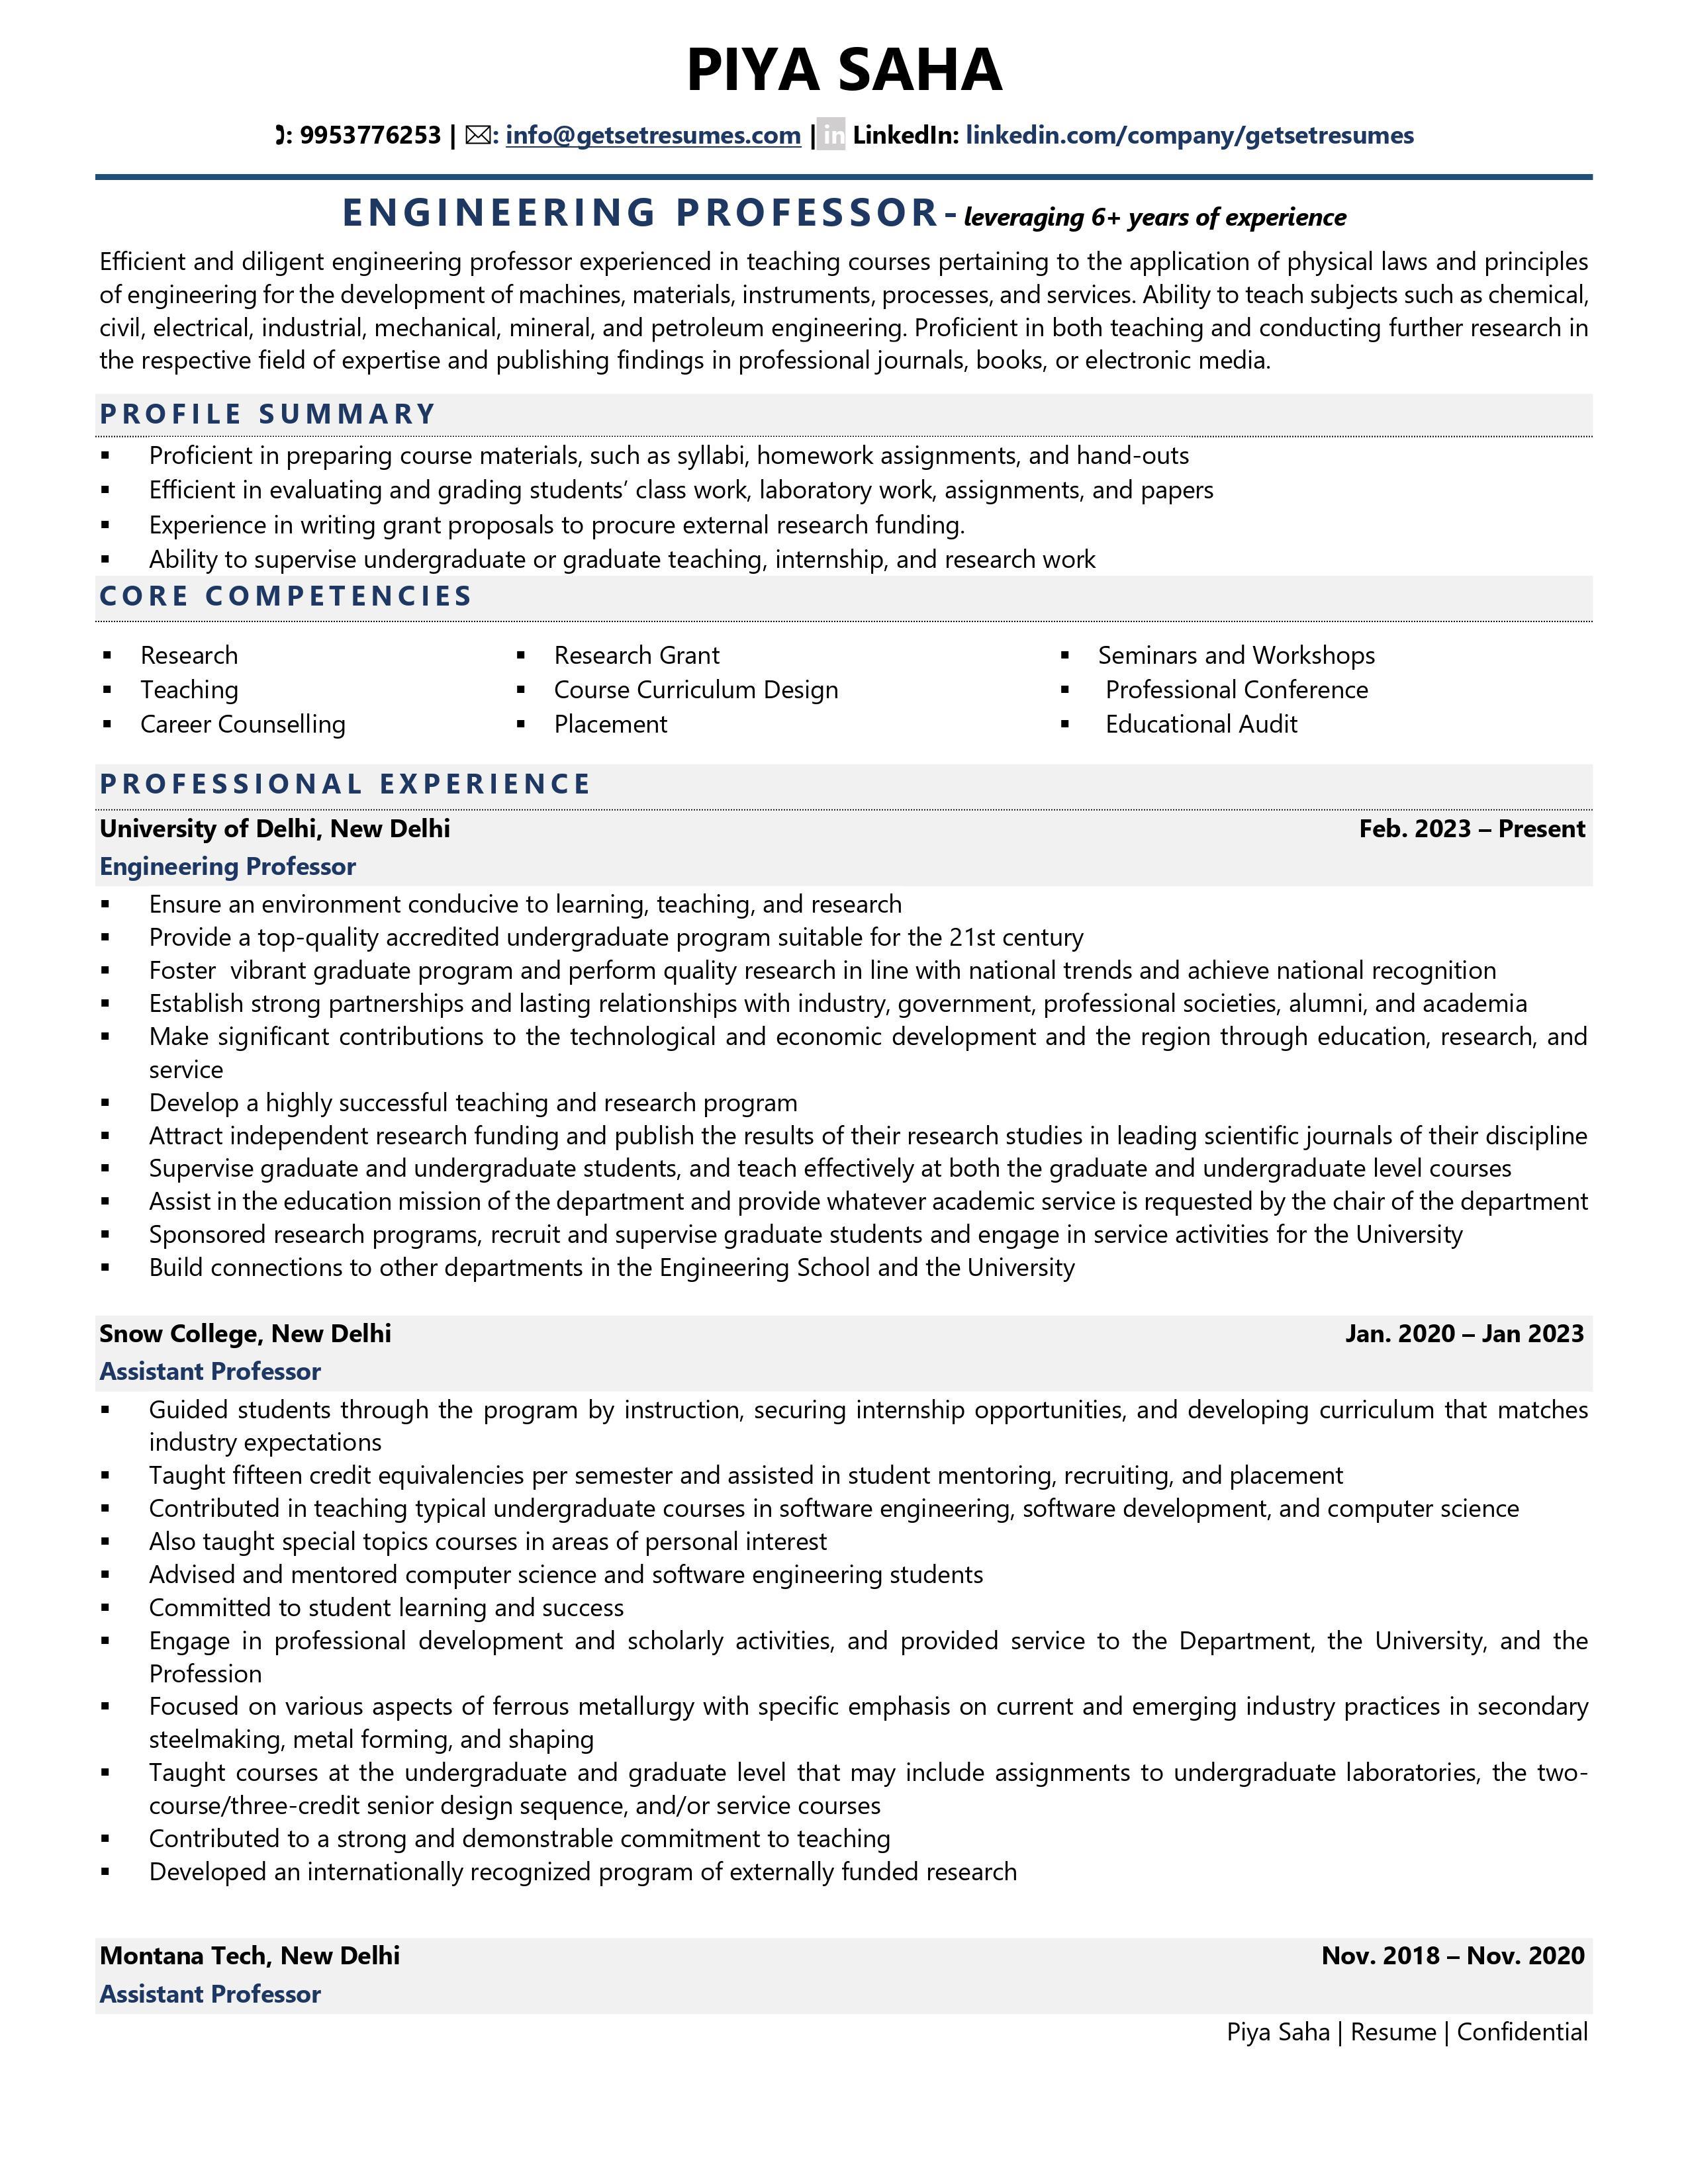 how to write engineering degree in resume